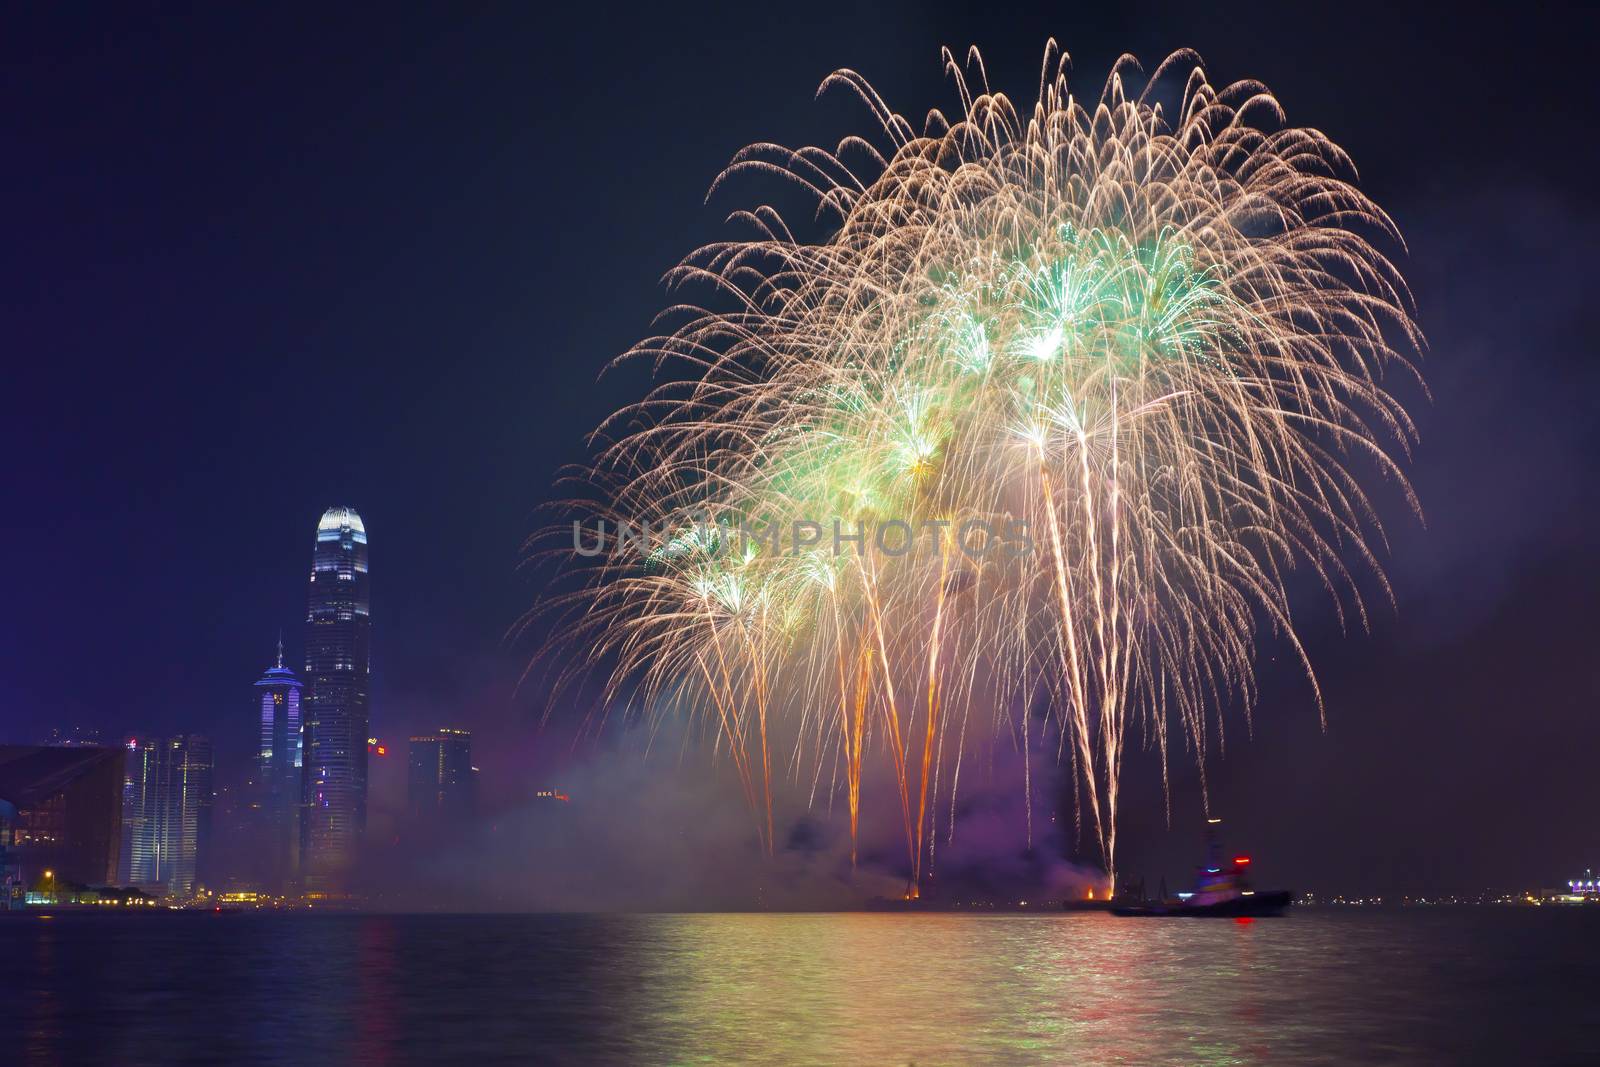 HONG KONG - FEBRUARY 1, Hong Kong Chinese New Year Fireworks at Victoria Harbour, Hong Kong on 1 February, 2014. It is the celebration of year of horse and lasts for 30 minutes.